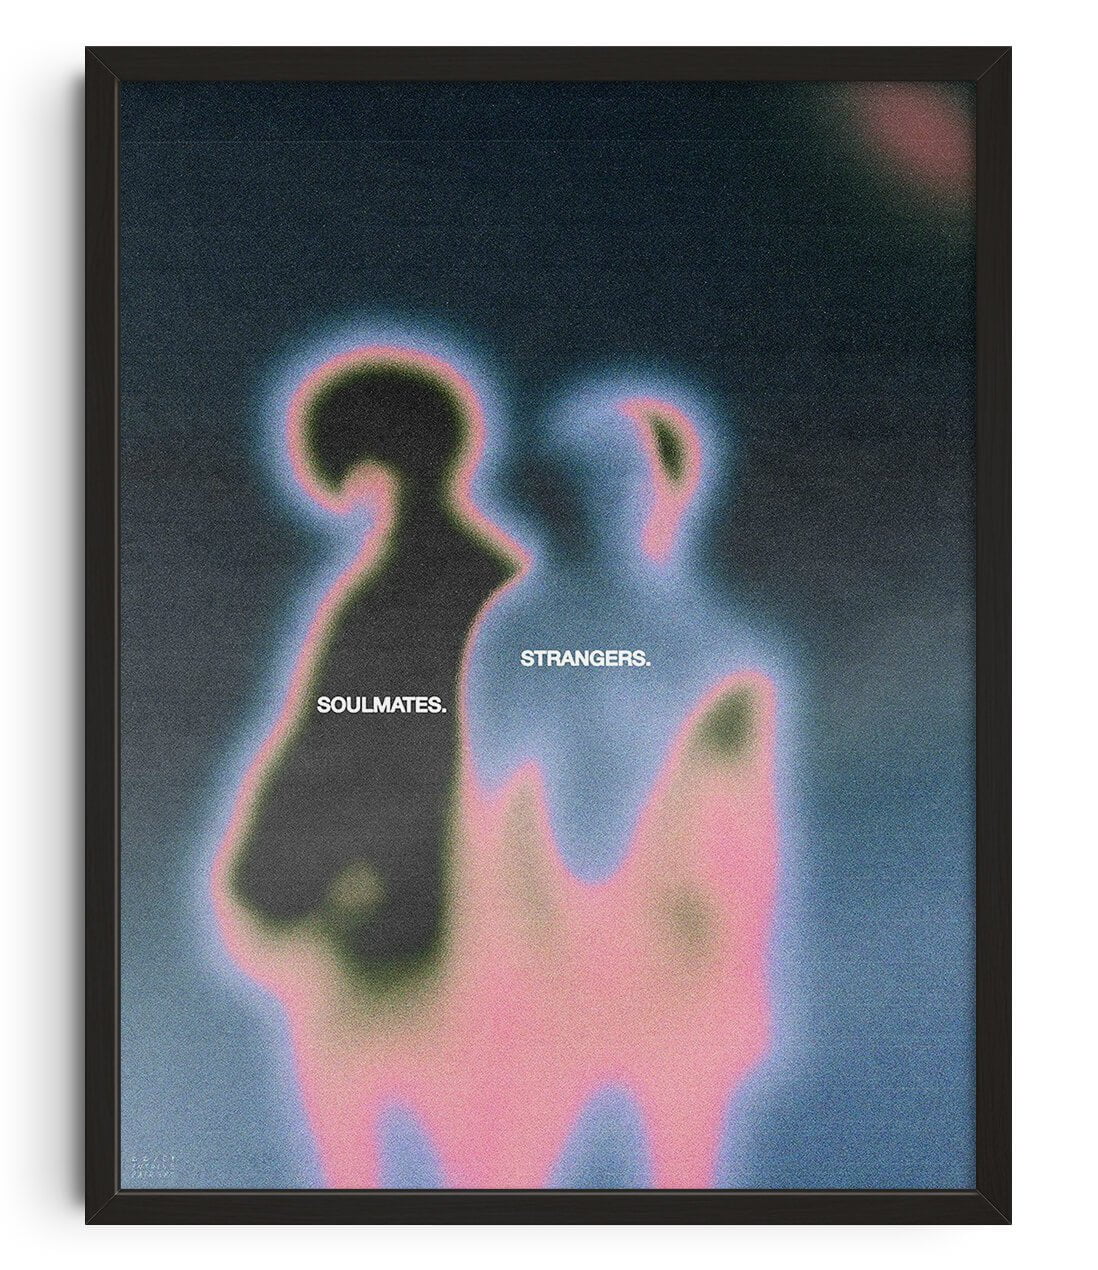 Soulmates & Strangers by Antoine Paikert contemporary wall art print from DROOL